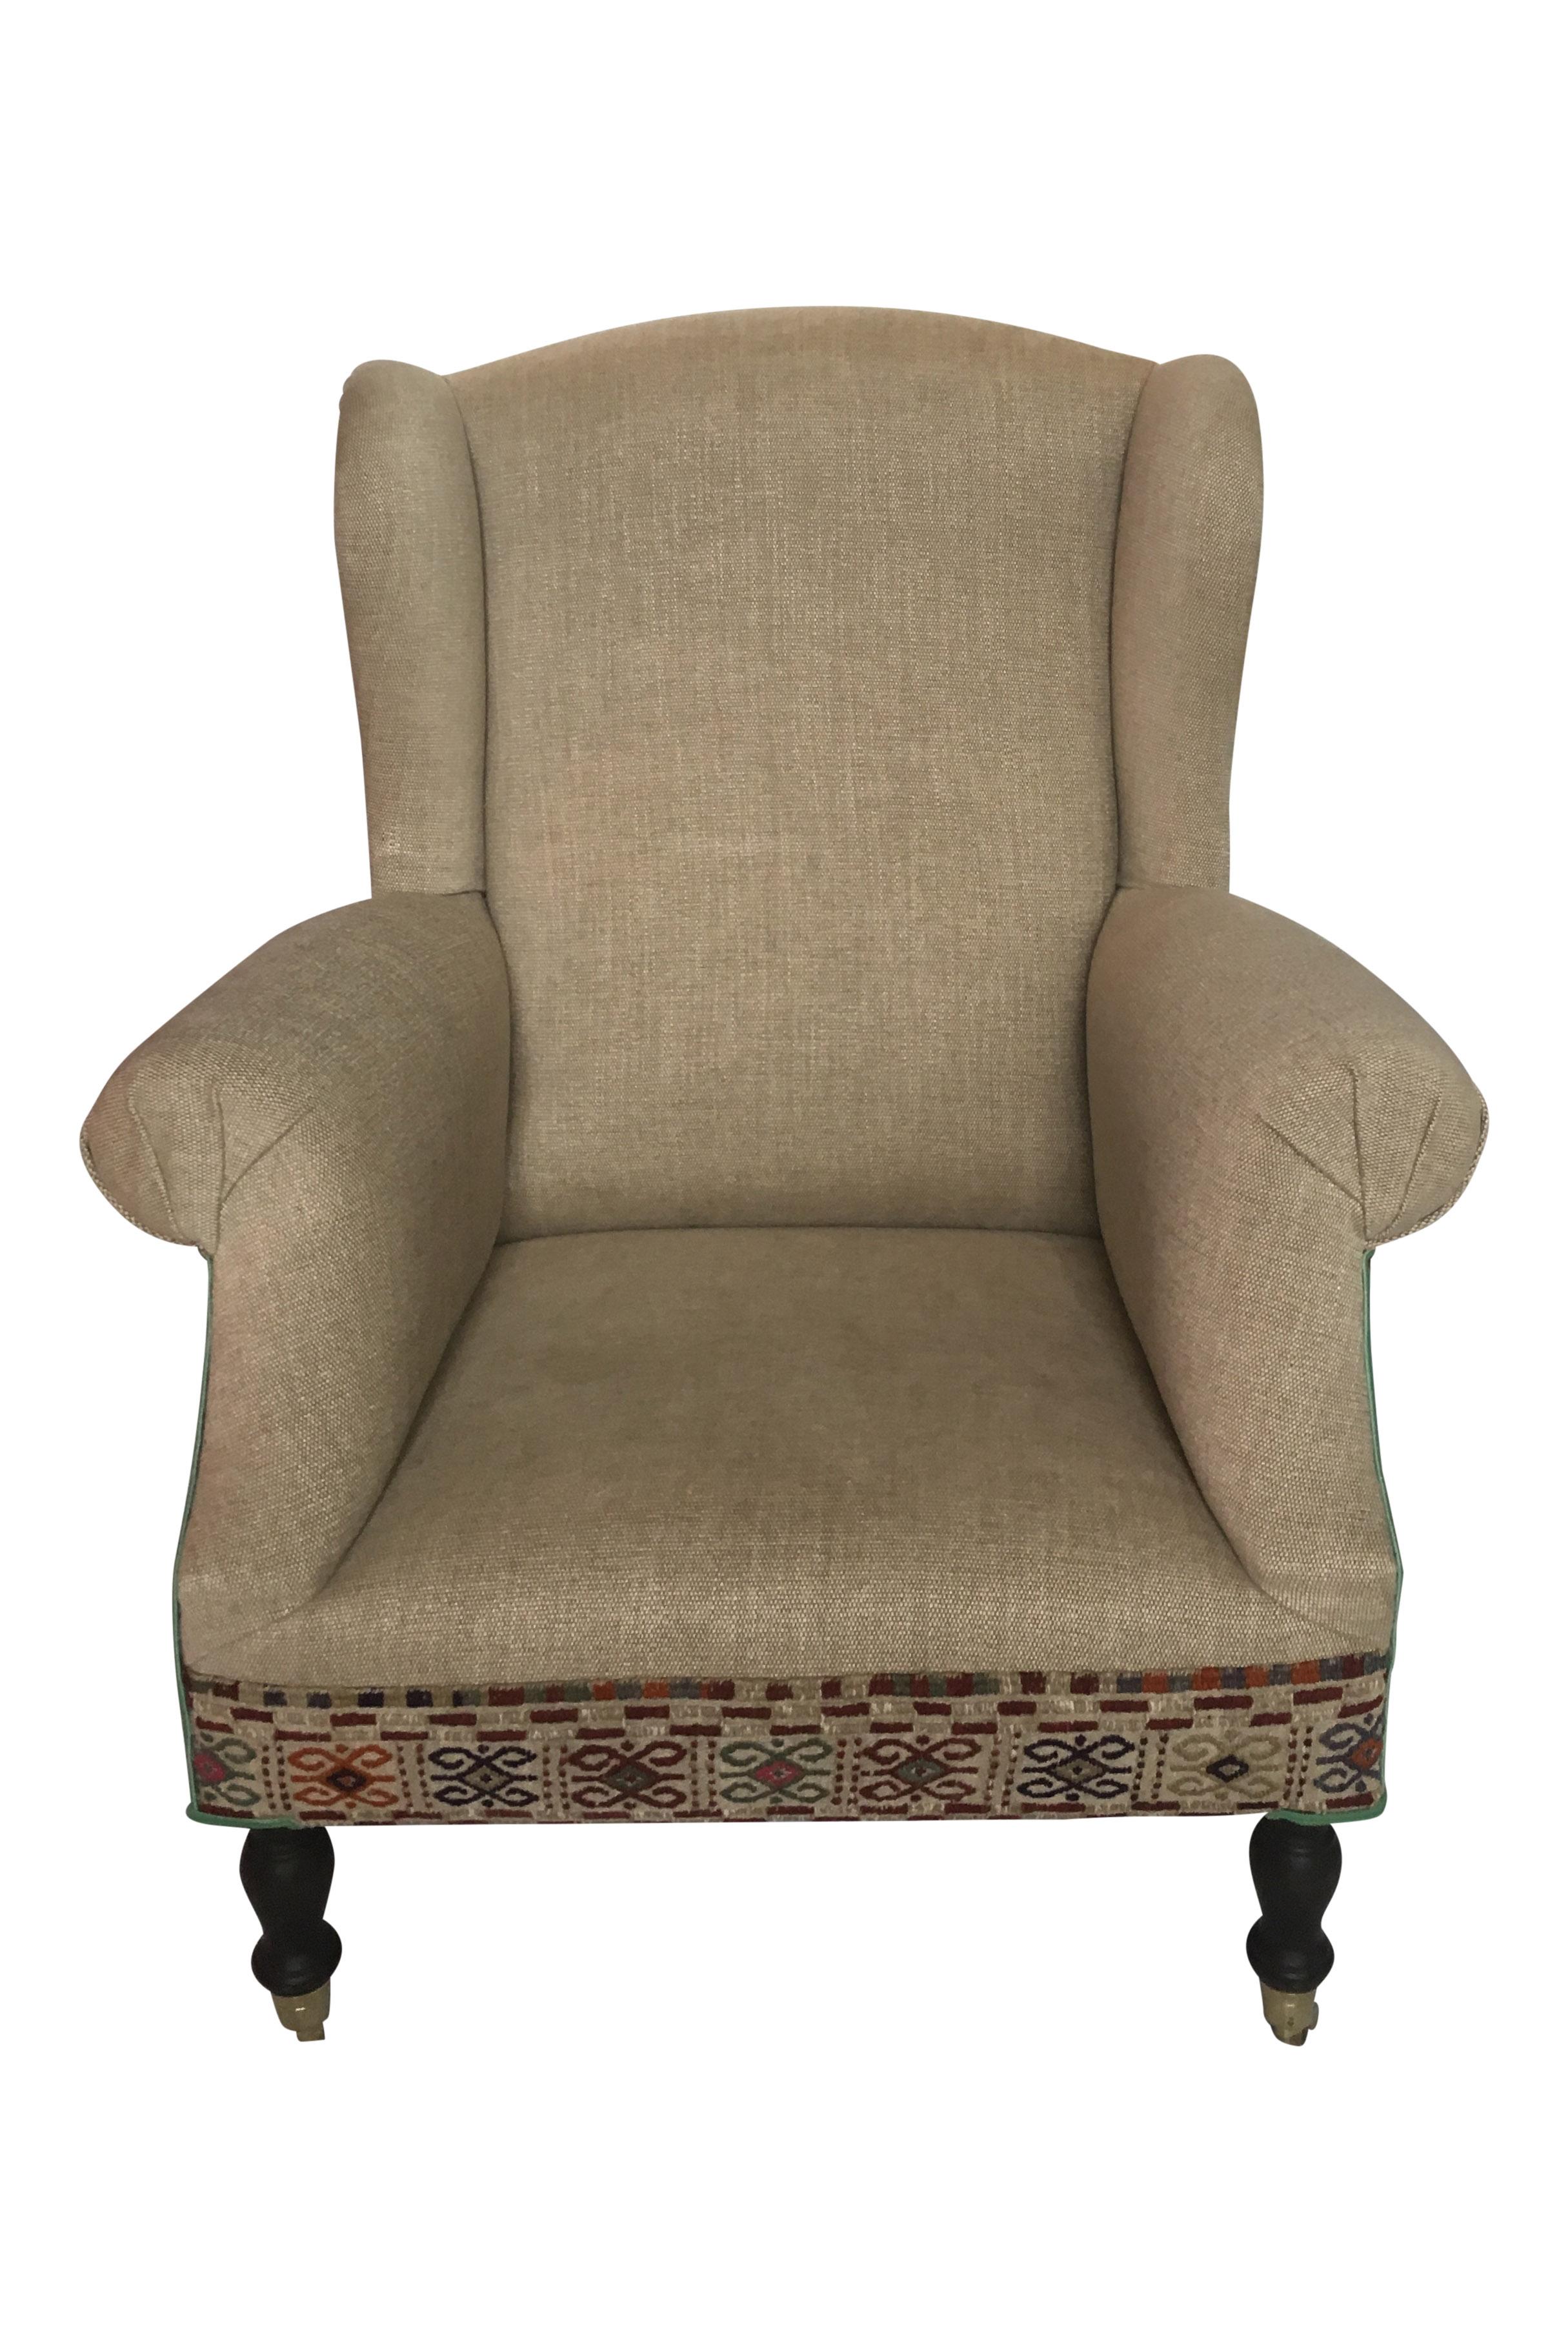 European Wingchair Queen Anne Style with Kelim Fabric